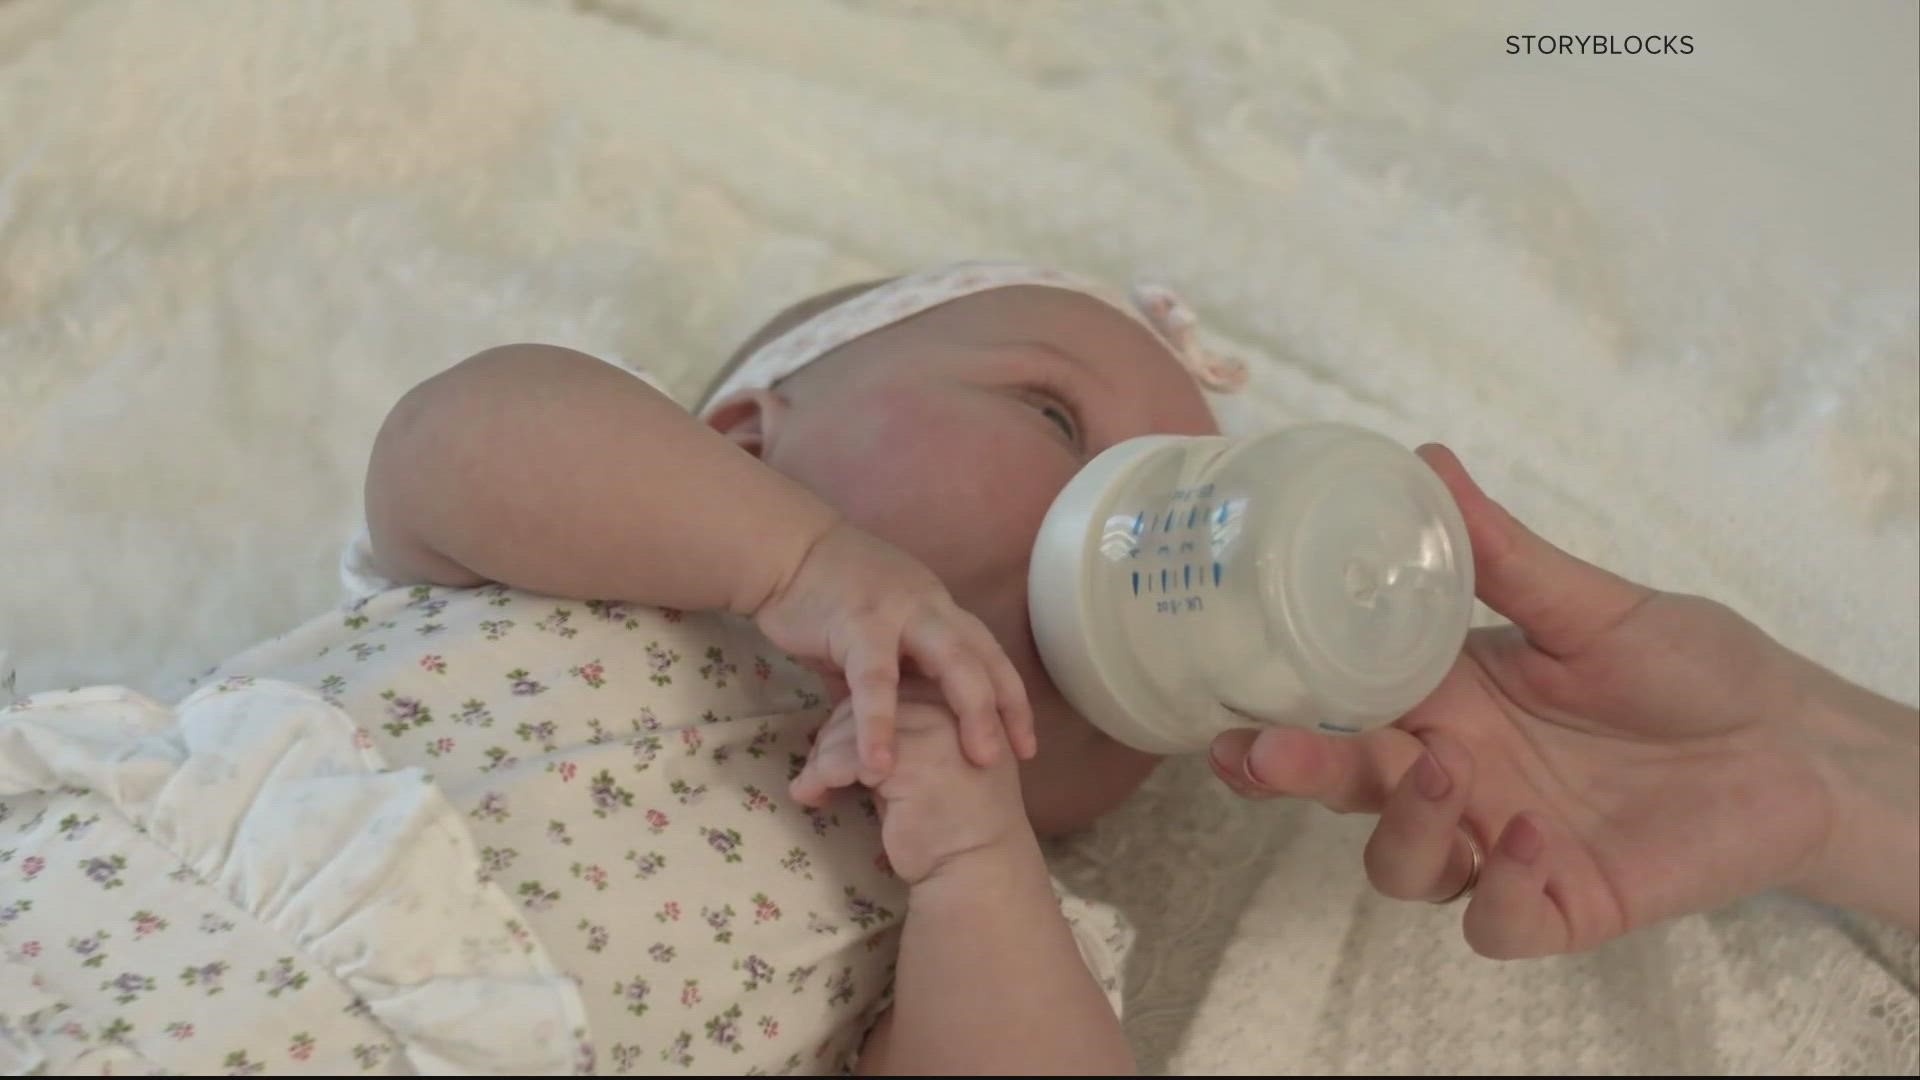 Here's what you need to know about the latest updates regarding the national baby formula shortage.